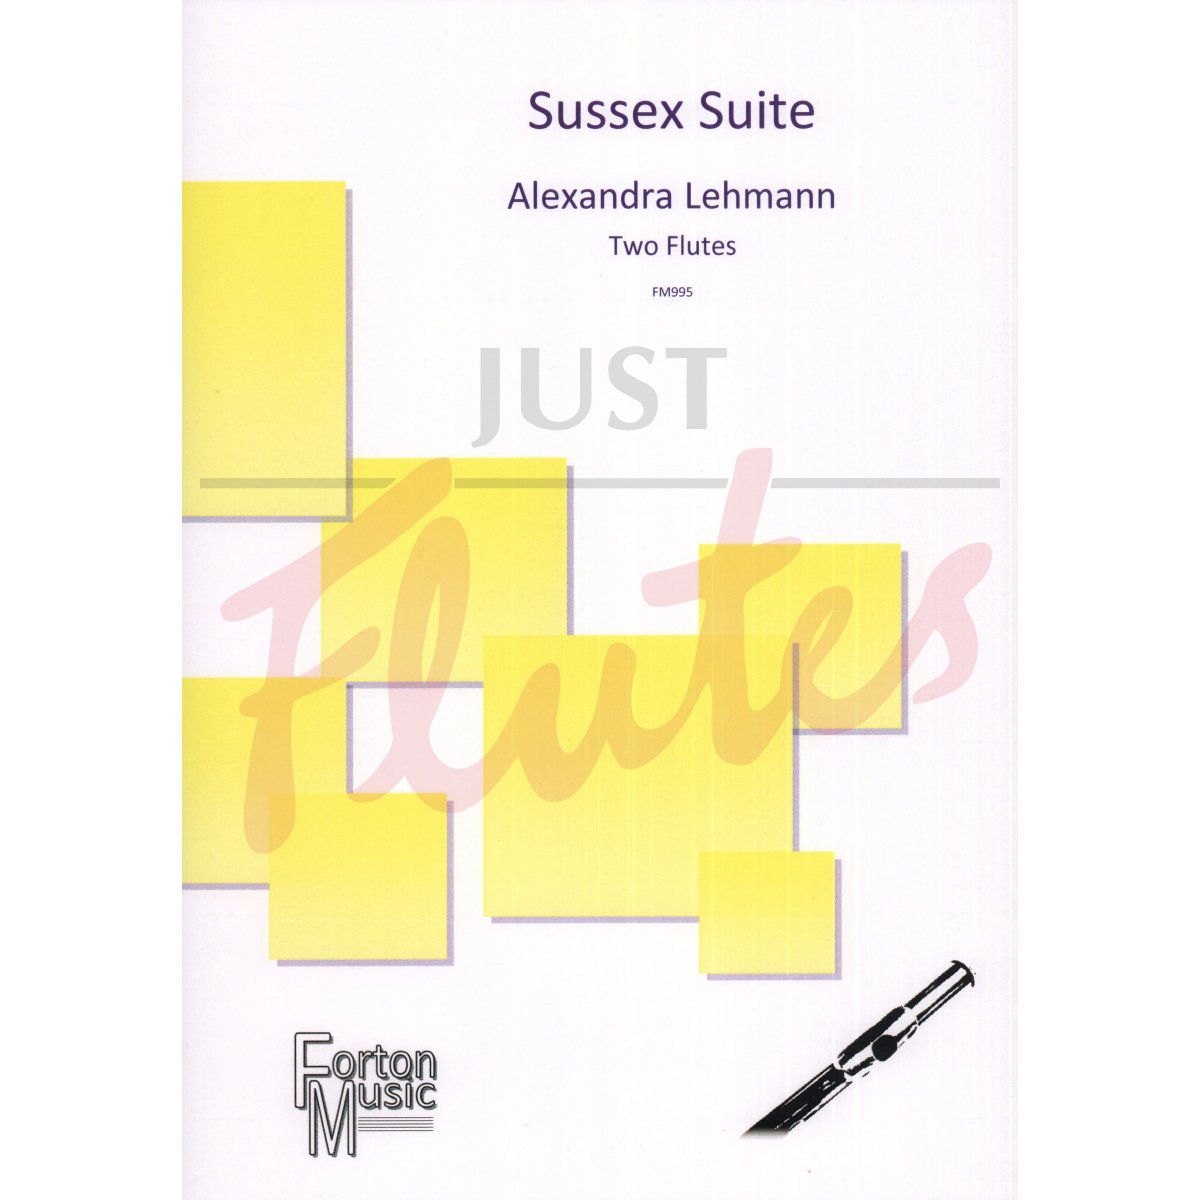 Sussex Suite for Two Flutes